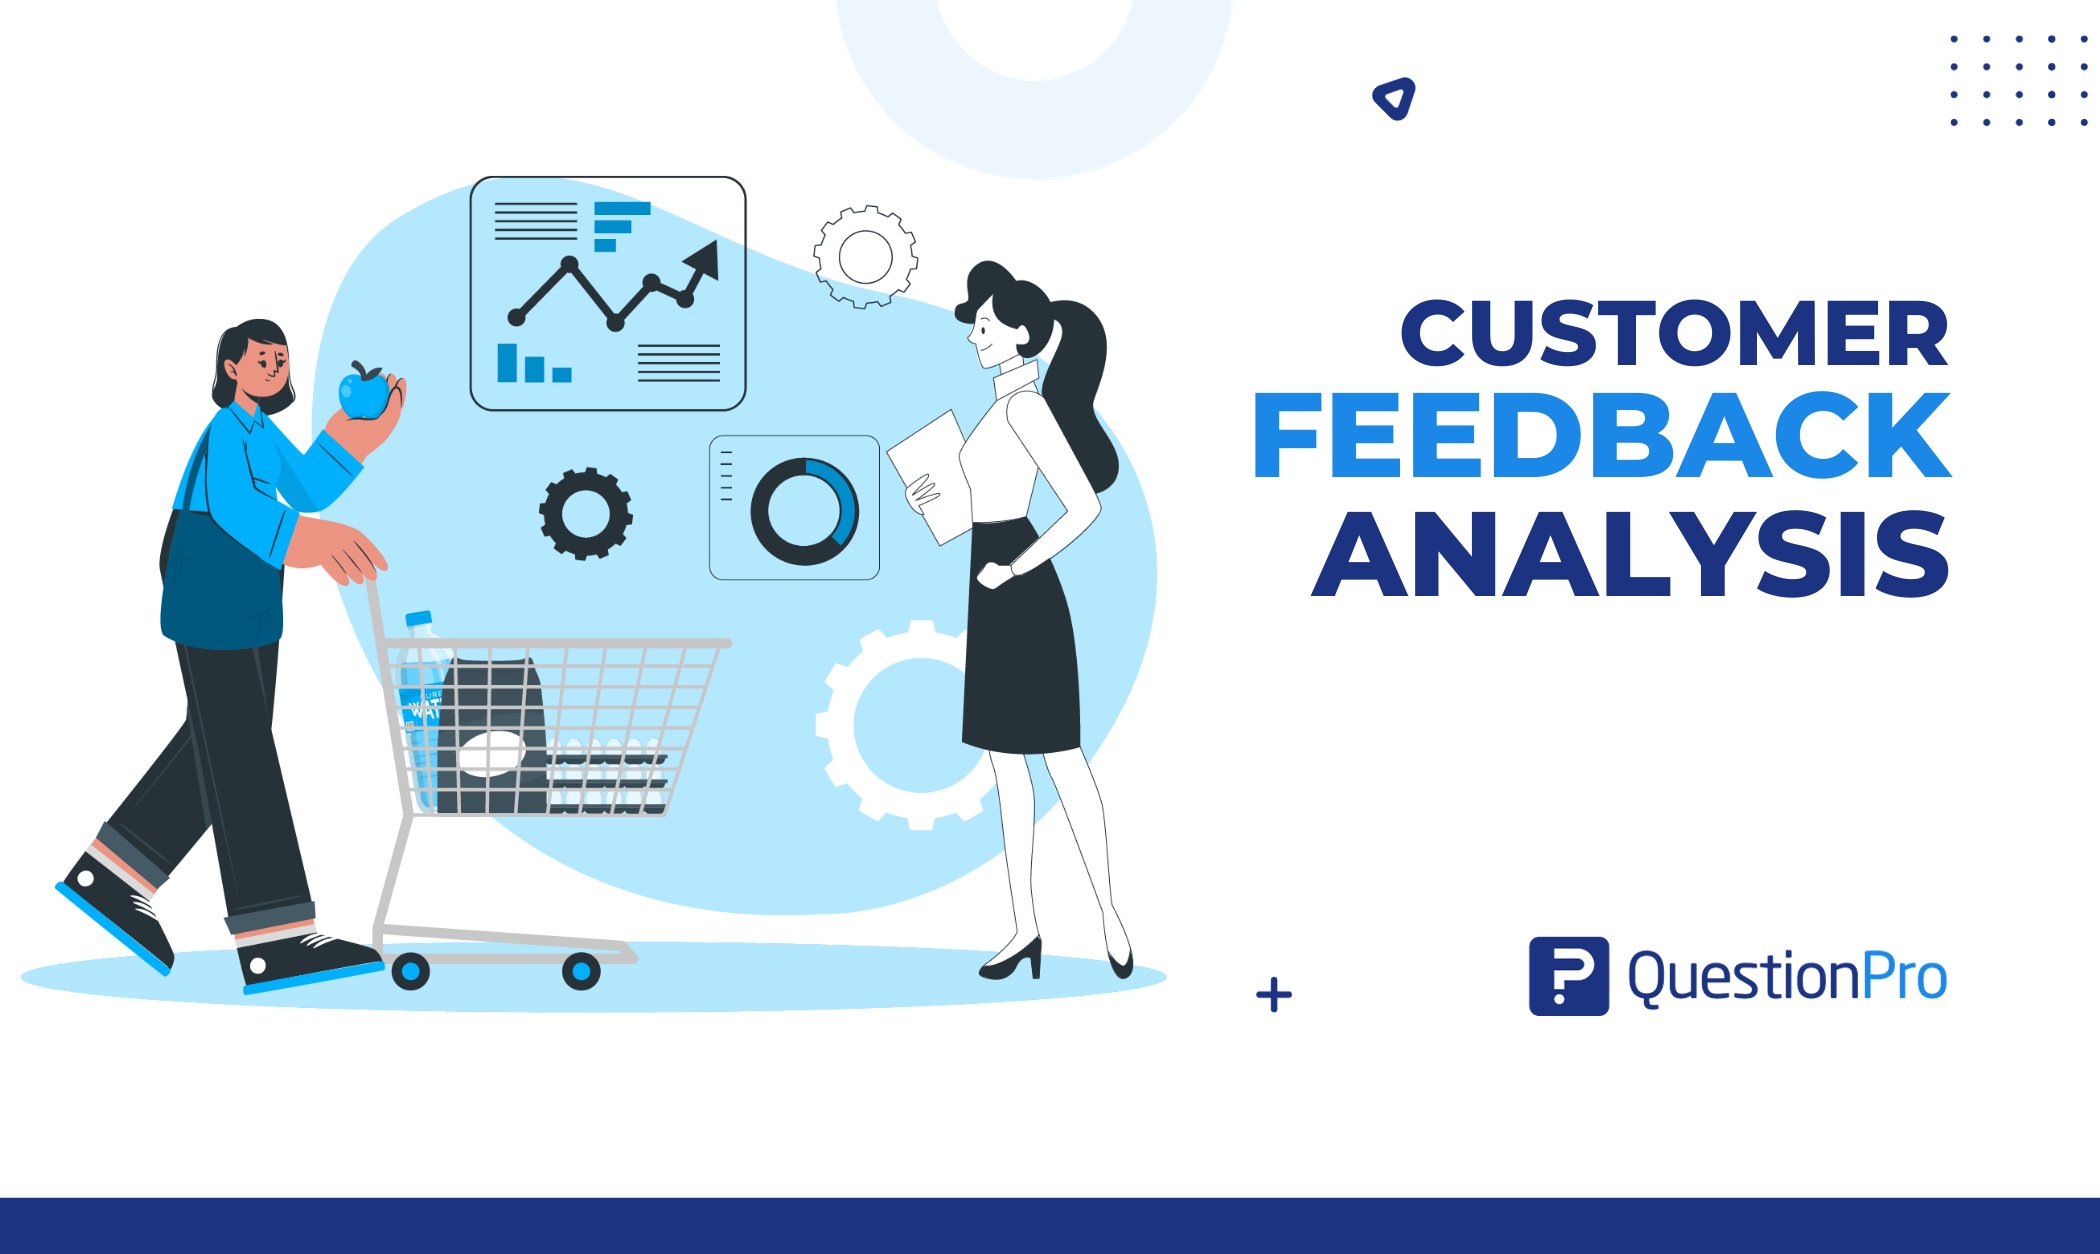 Business success depends on understanding and acting on customer feedback analysis. It reveals what customers love and hate.